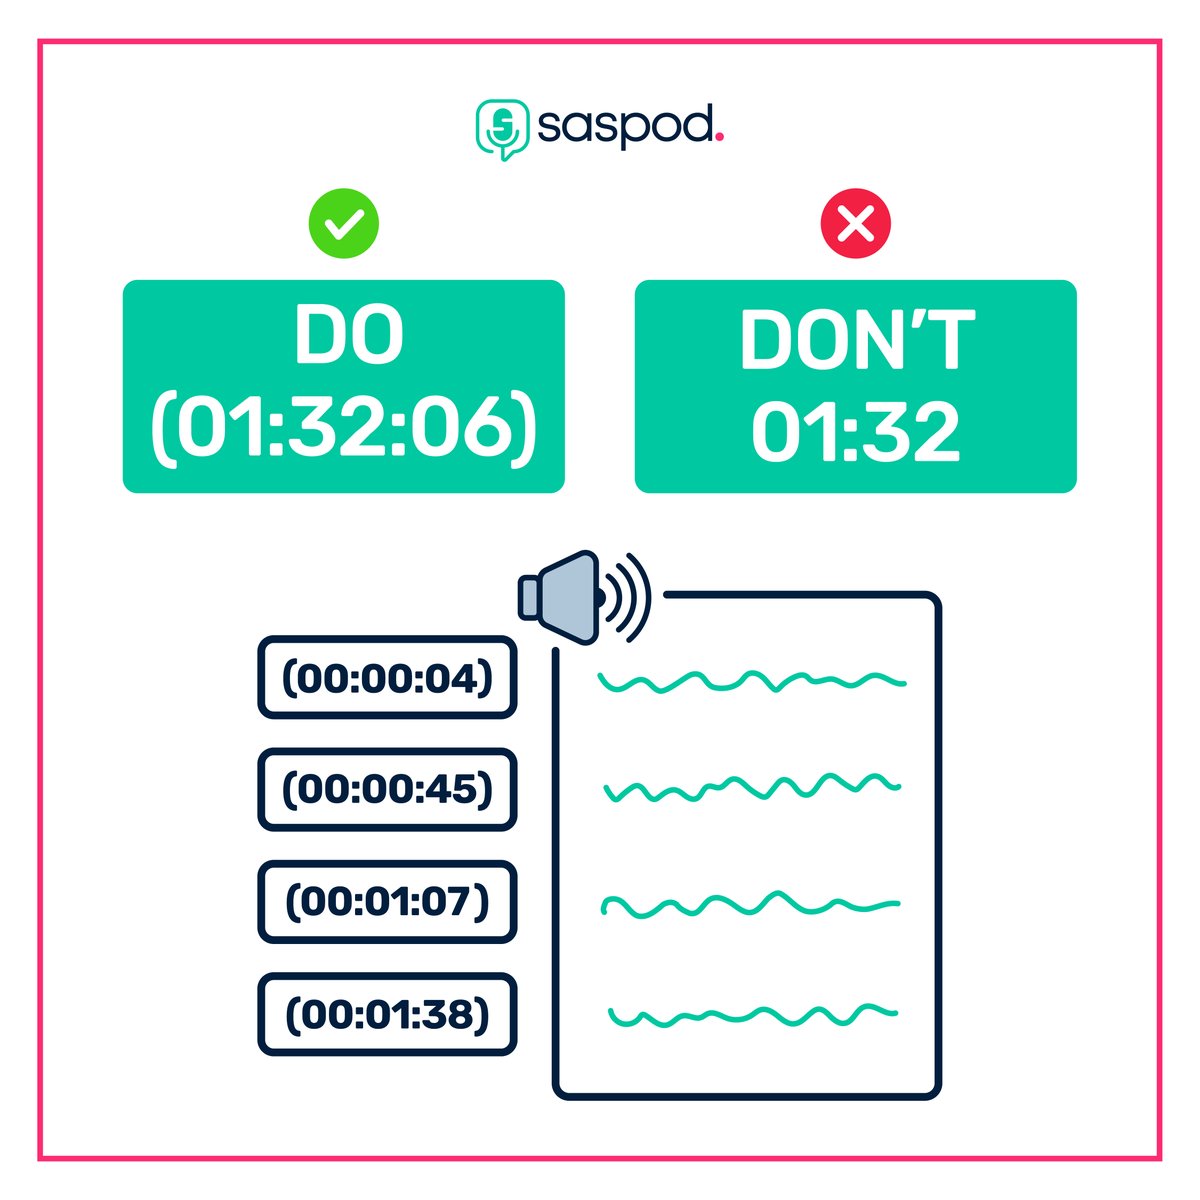 Improve your podcast listening experience! 🎧

Time-stamps offer your listeners an interactive way to explore topics within your podcast. 

Use formatted timestamps with parenthesis for precise linking to key moments in your podcast. 

#Podcasting #PodcastingTips #Saspod  #TOTW